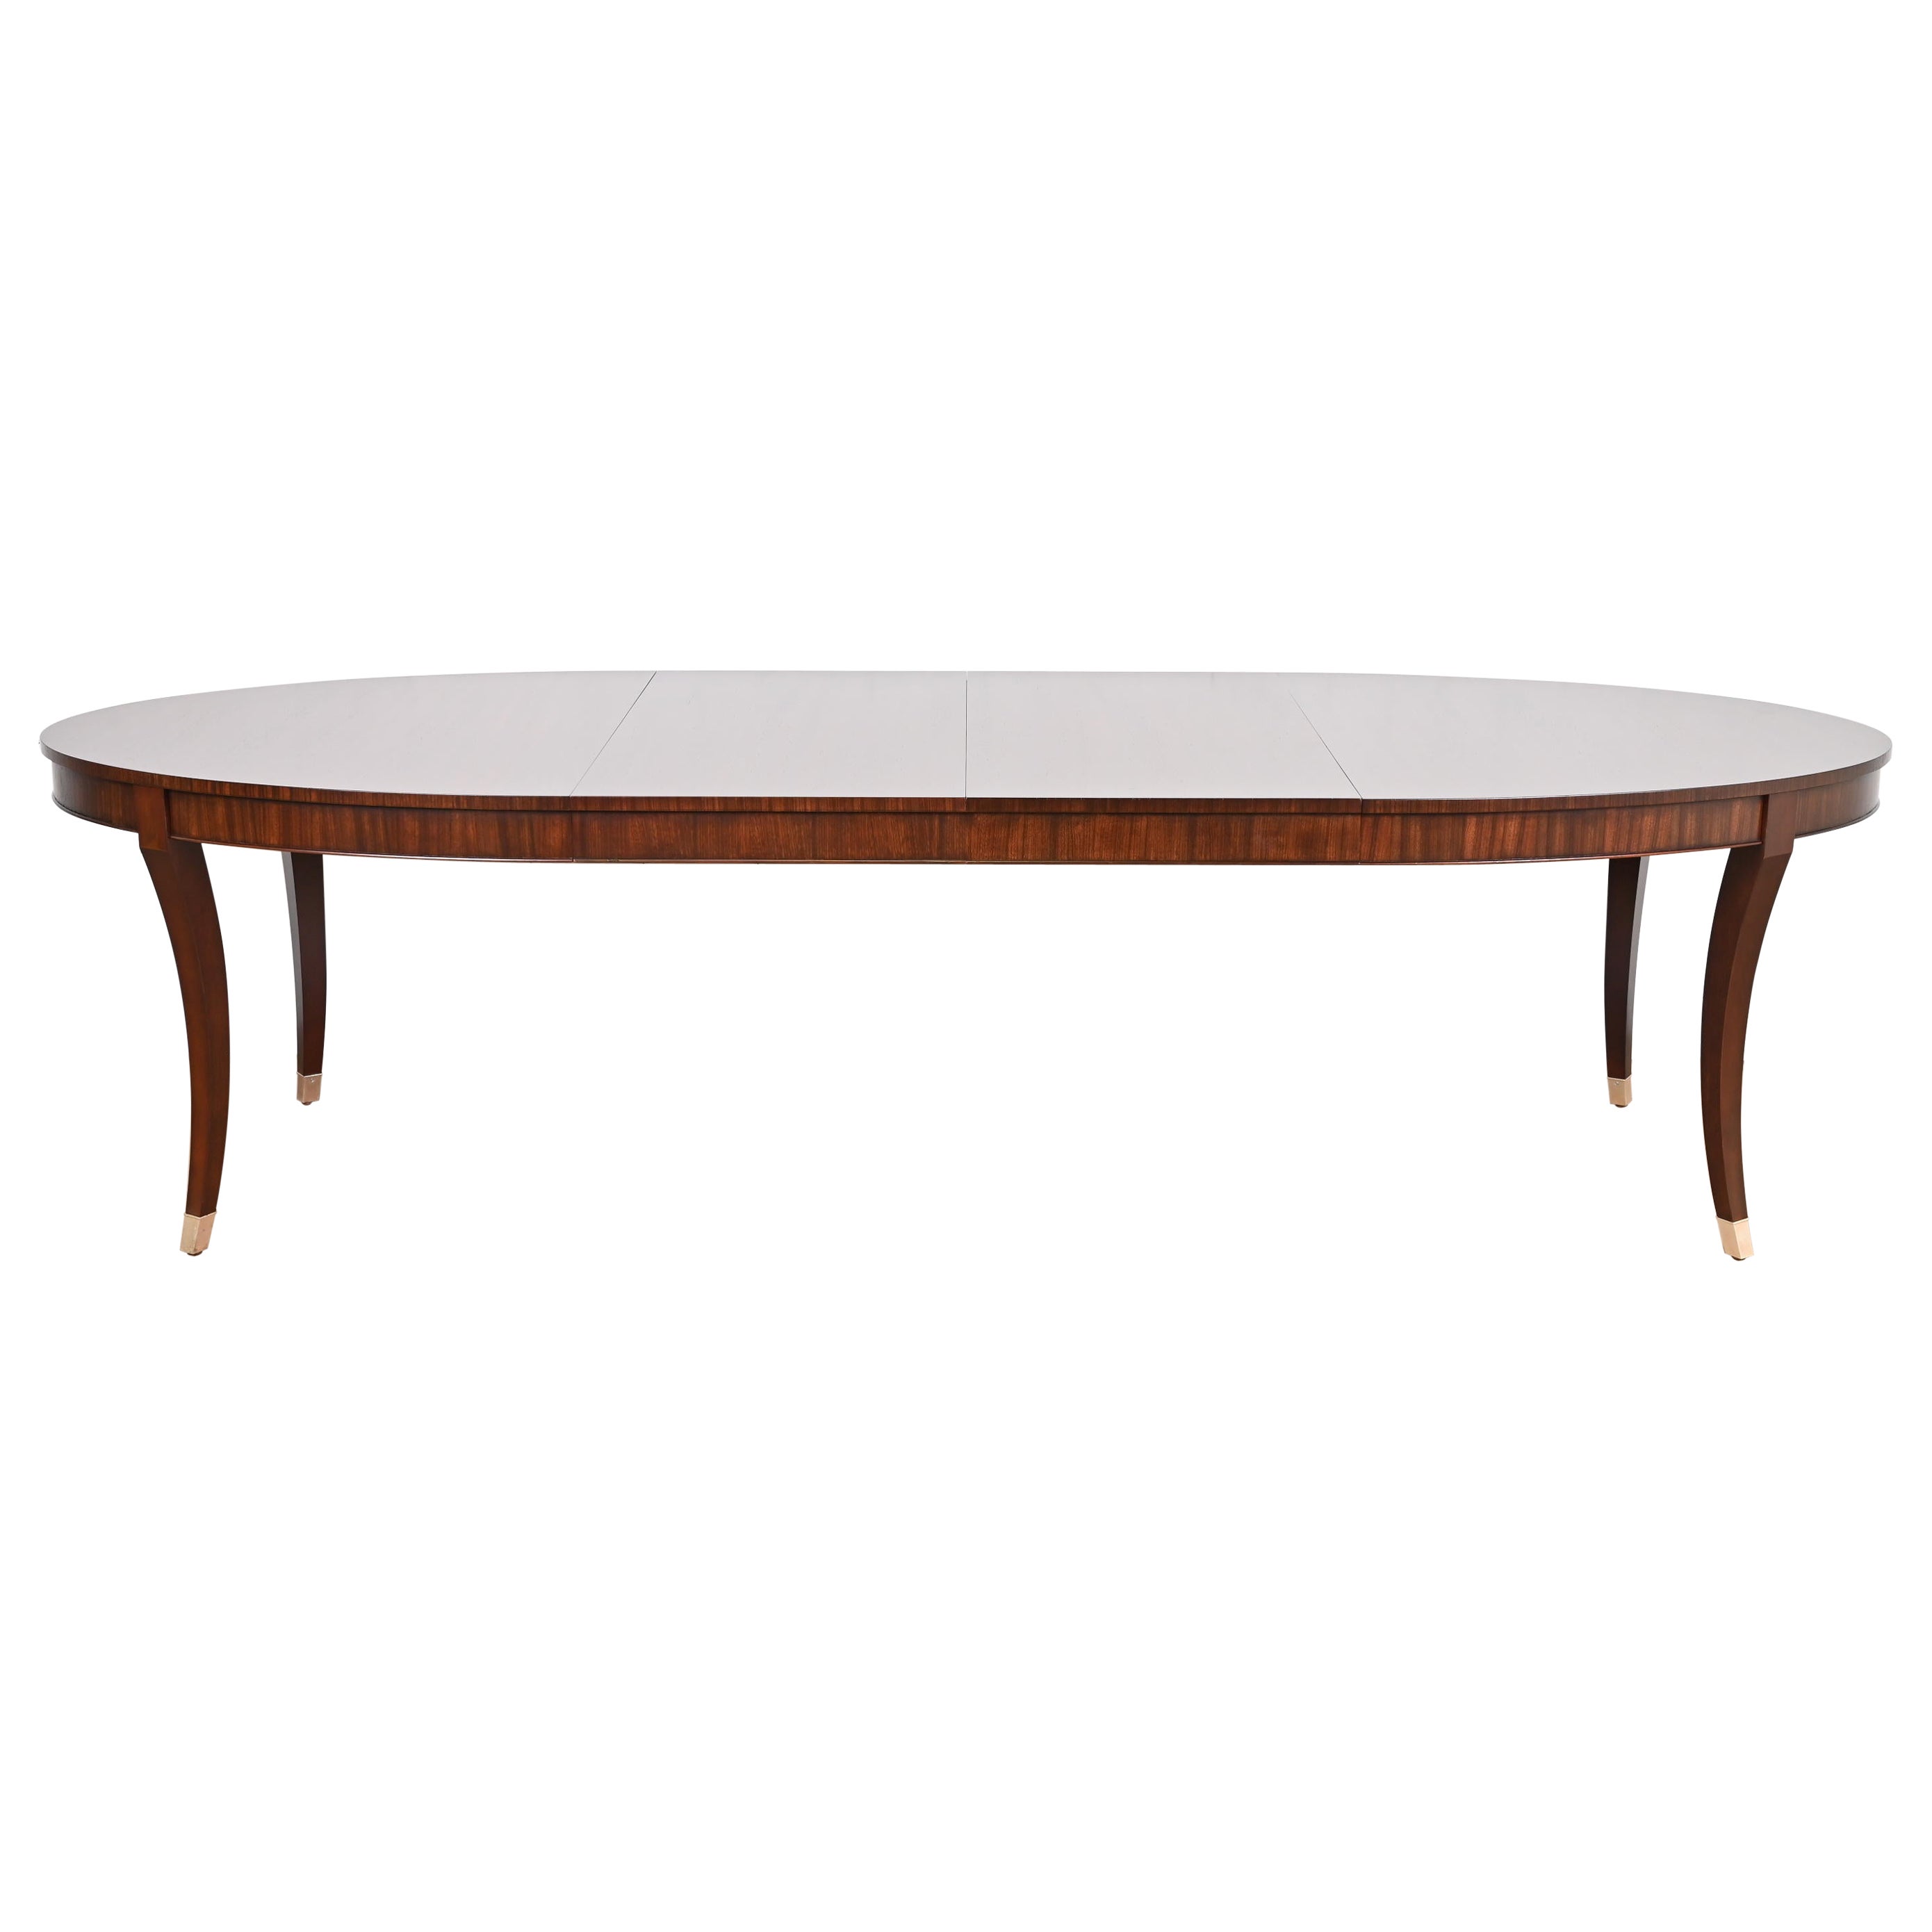 Barbara Barry Style Modern Regency Mahogany Saber Leg Extension Dining Table For Sale